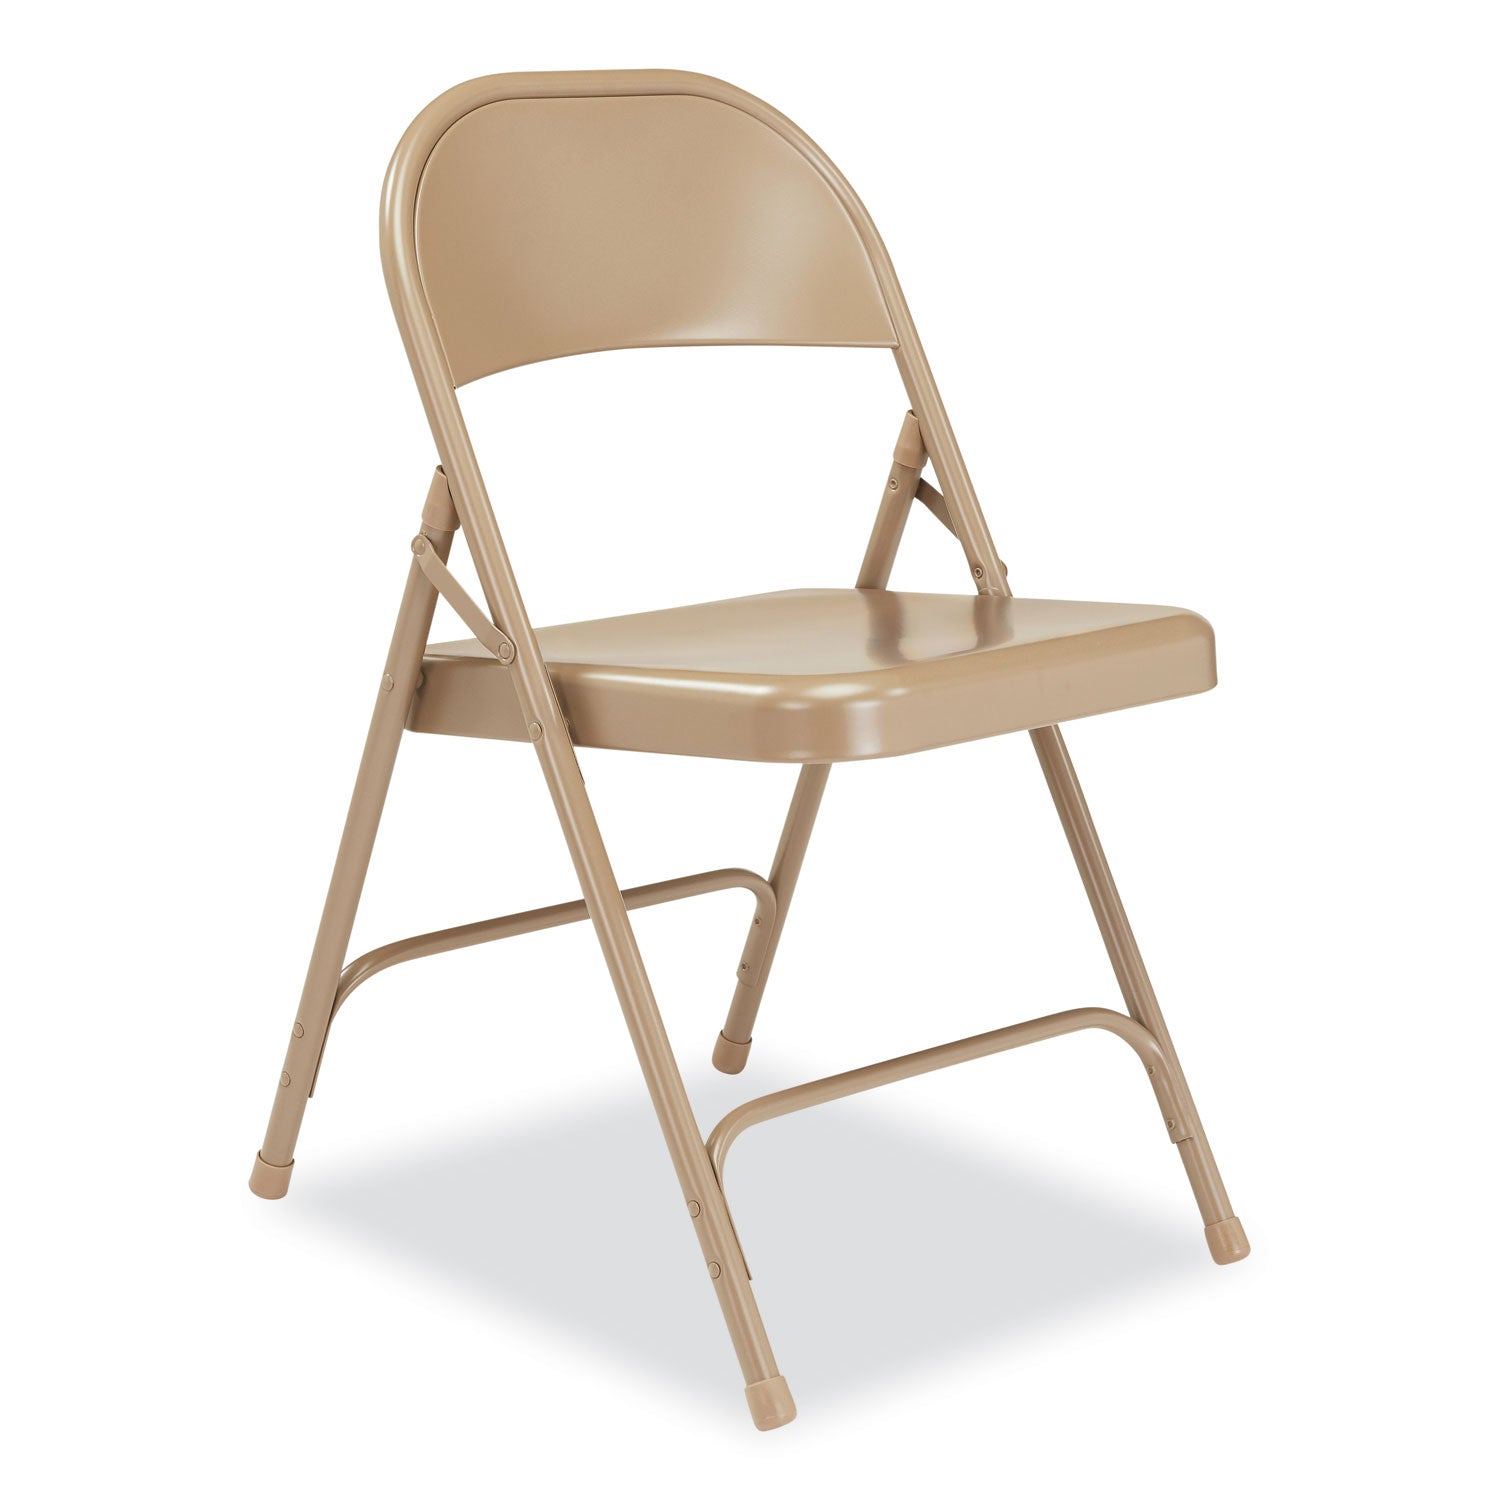 50-series-all-steel-folding-chair-supports-500-lb-1675-seat-ht-beige-seat-back-beige-base-4-ct-ships-in-1-3-bus-days_nps51 - 2